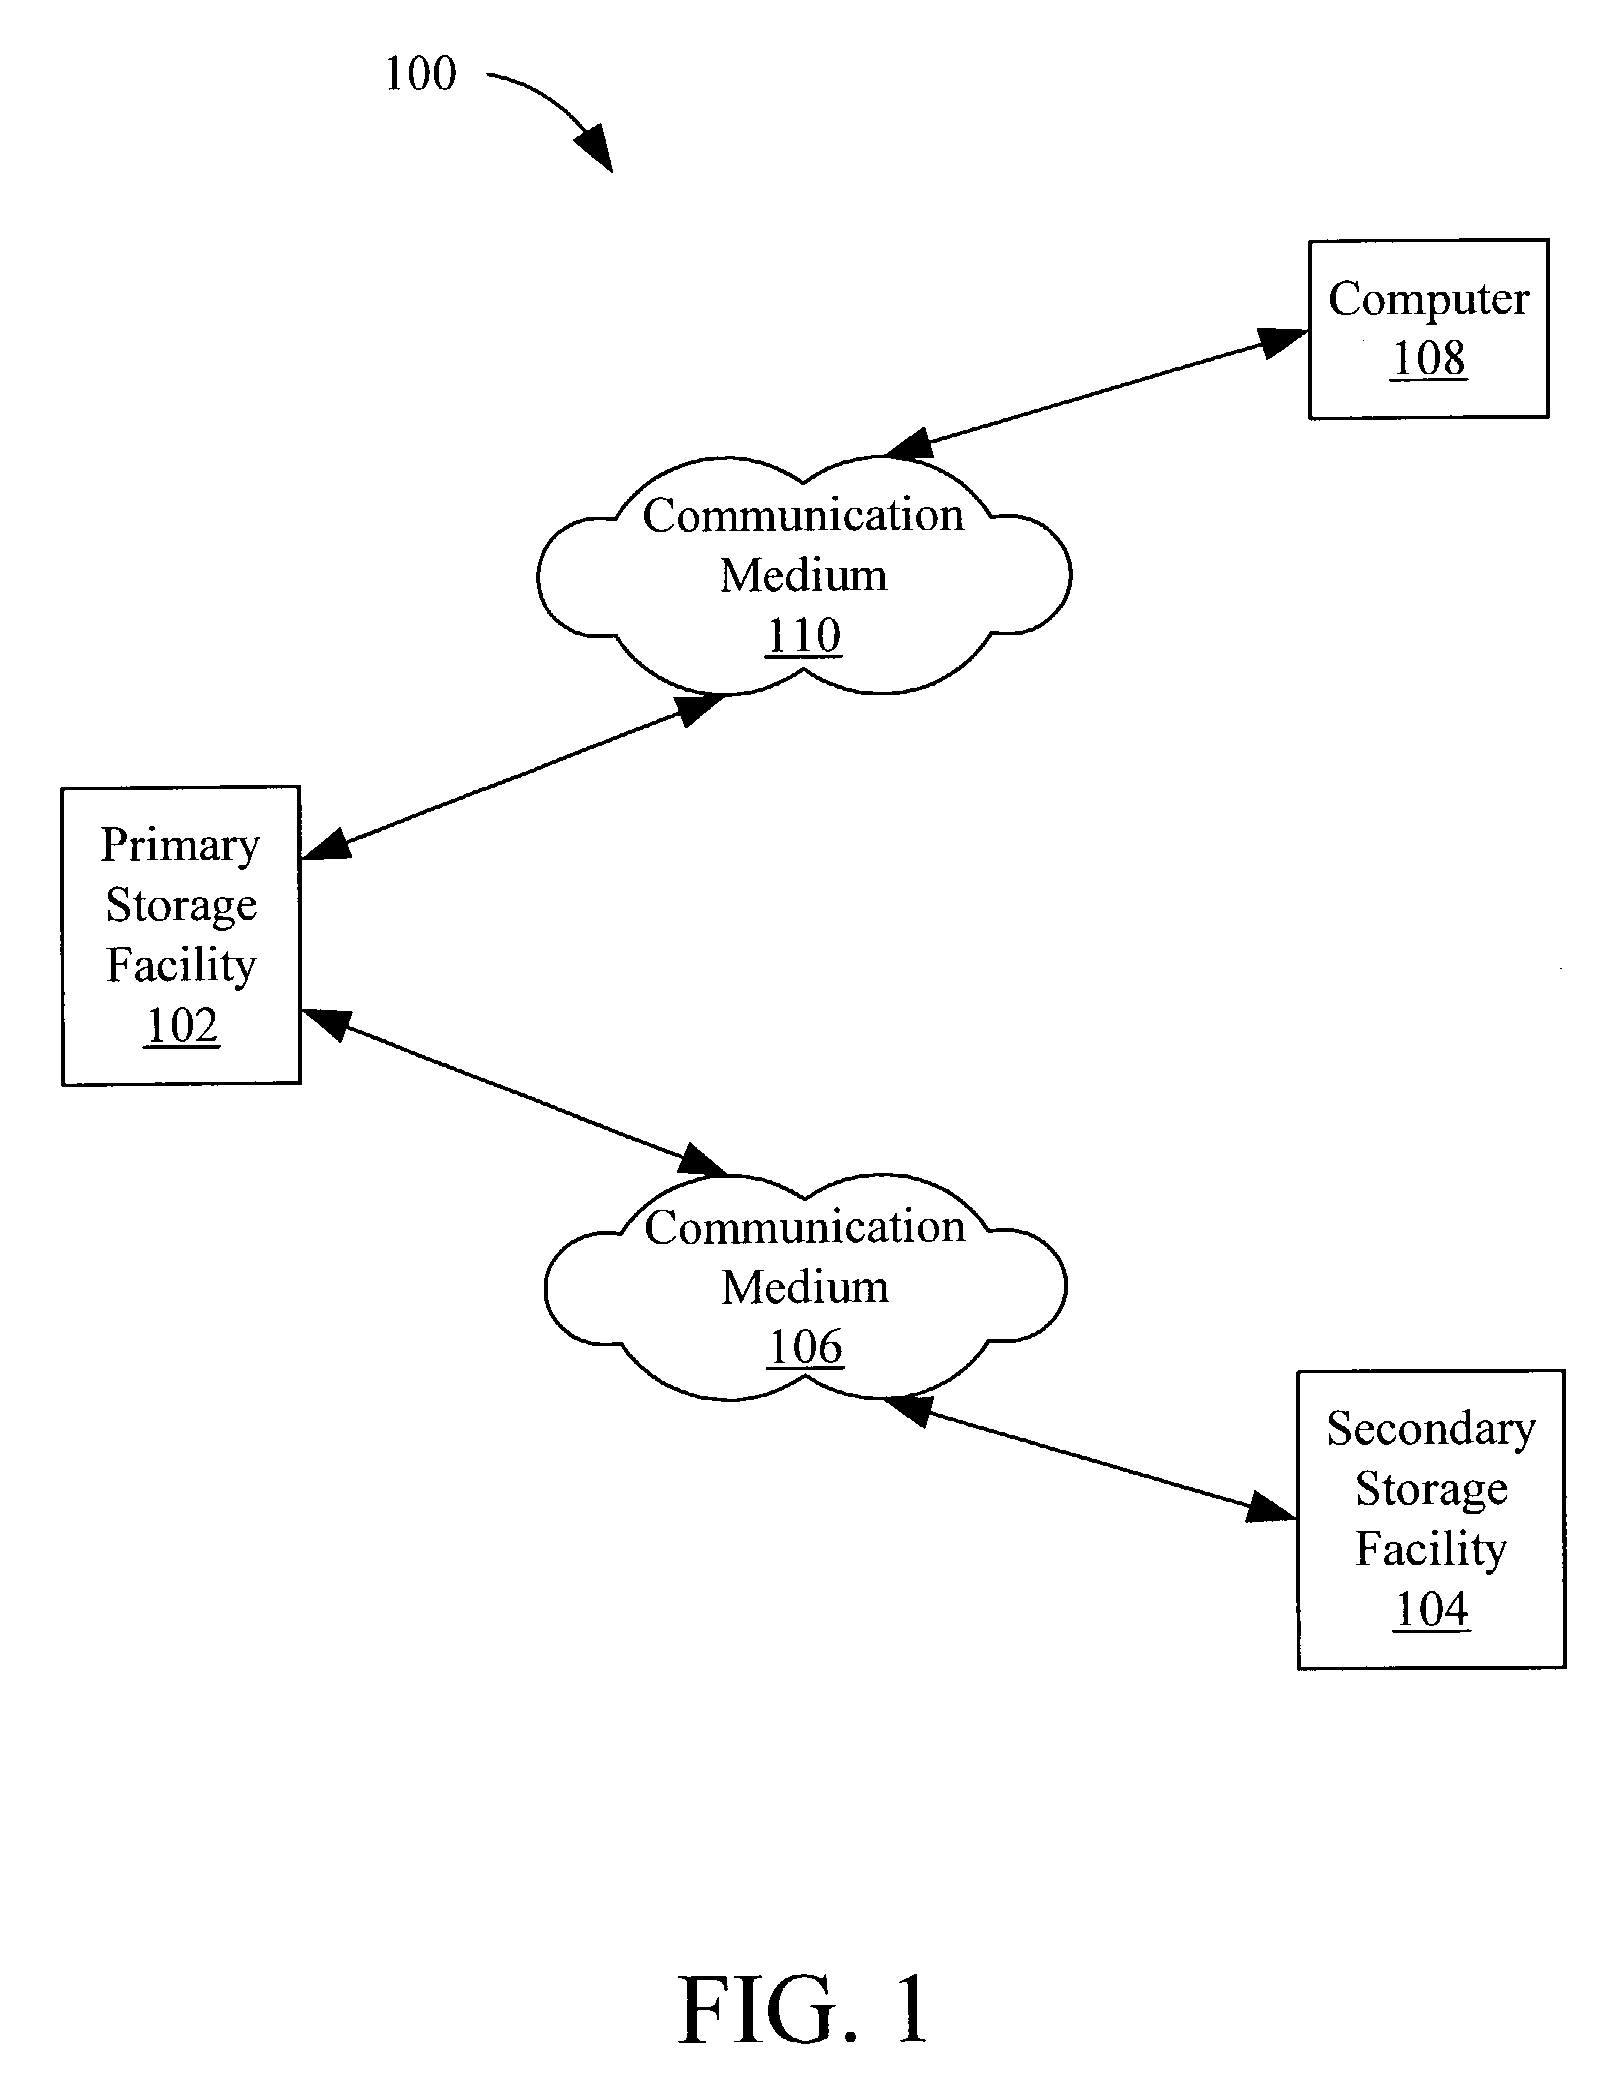 State machine and system for data redundancy